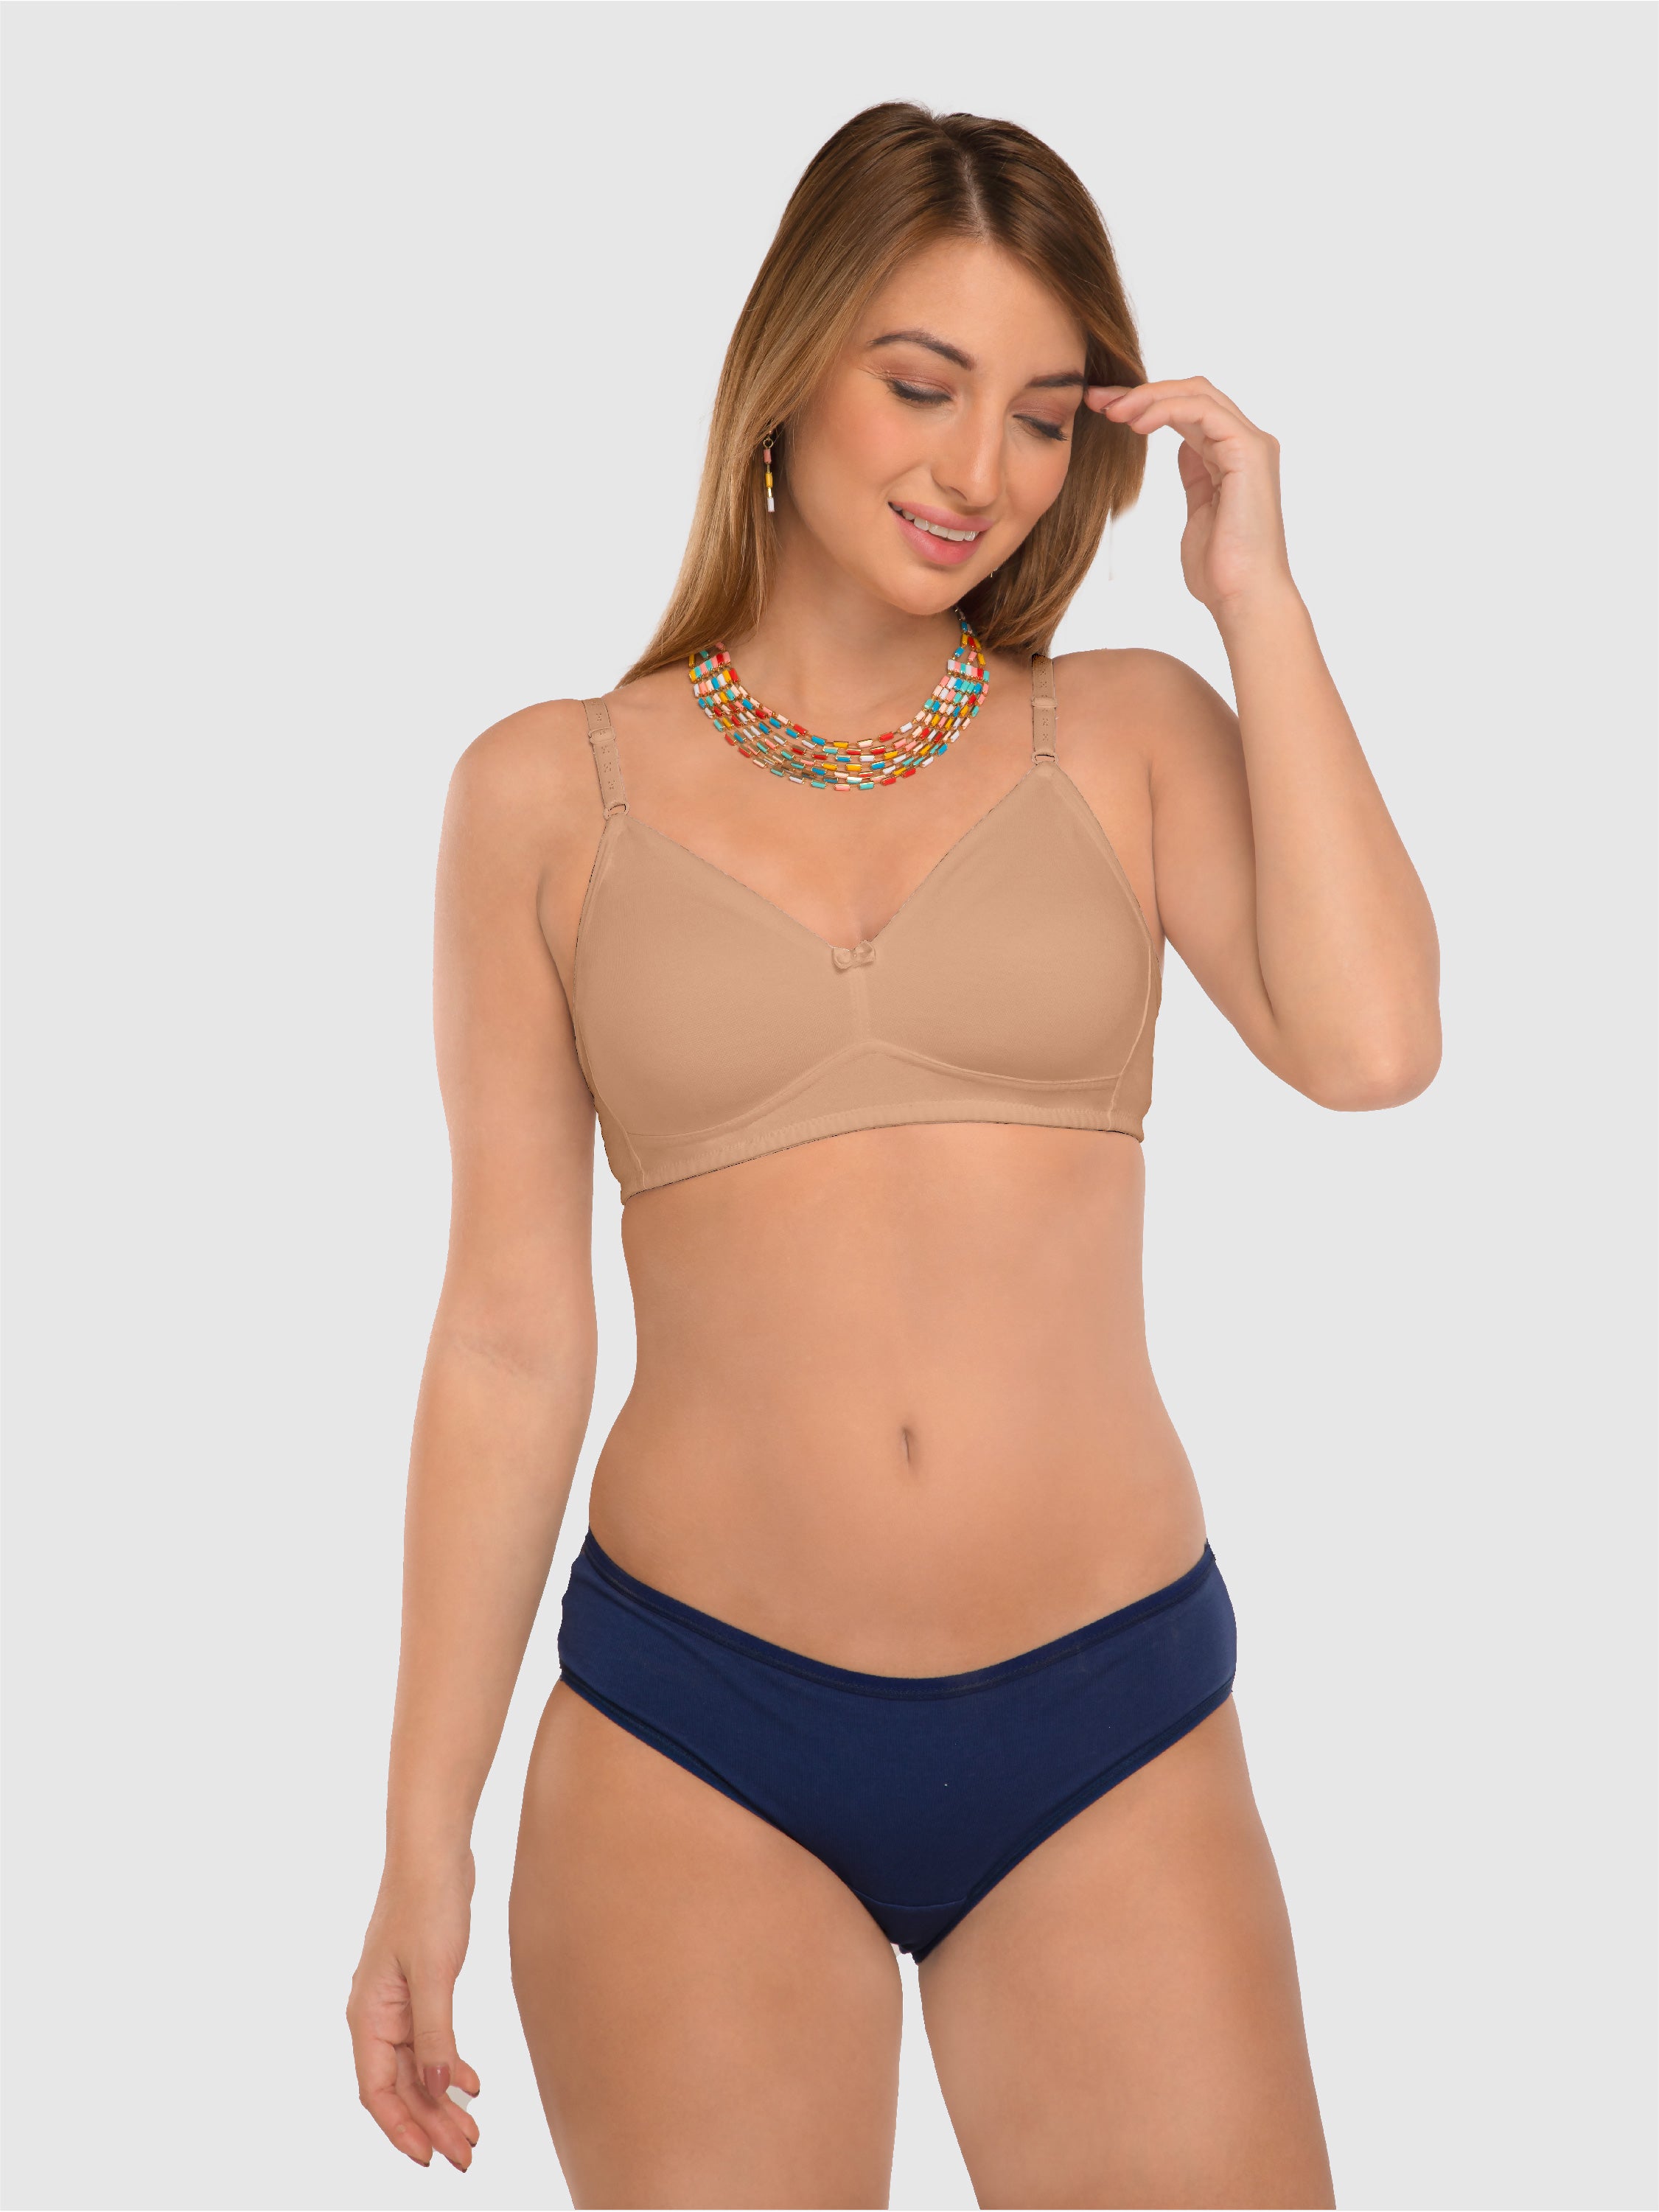 Daisy Dee Skin Non Padded Non Wired Full Coverage Bra NDSZN-Skin